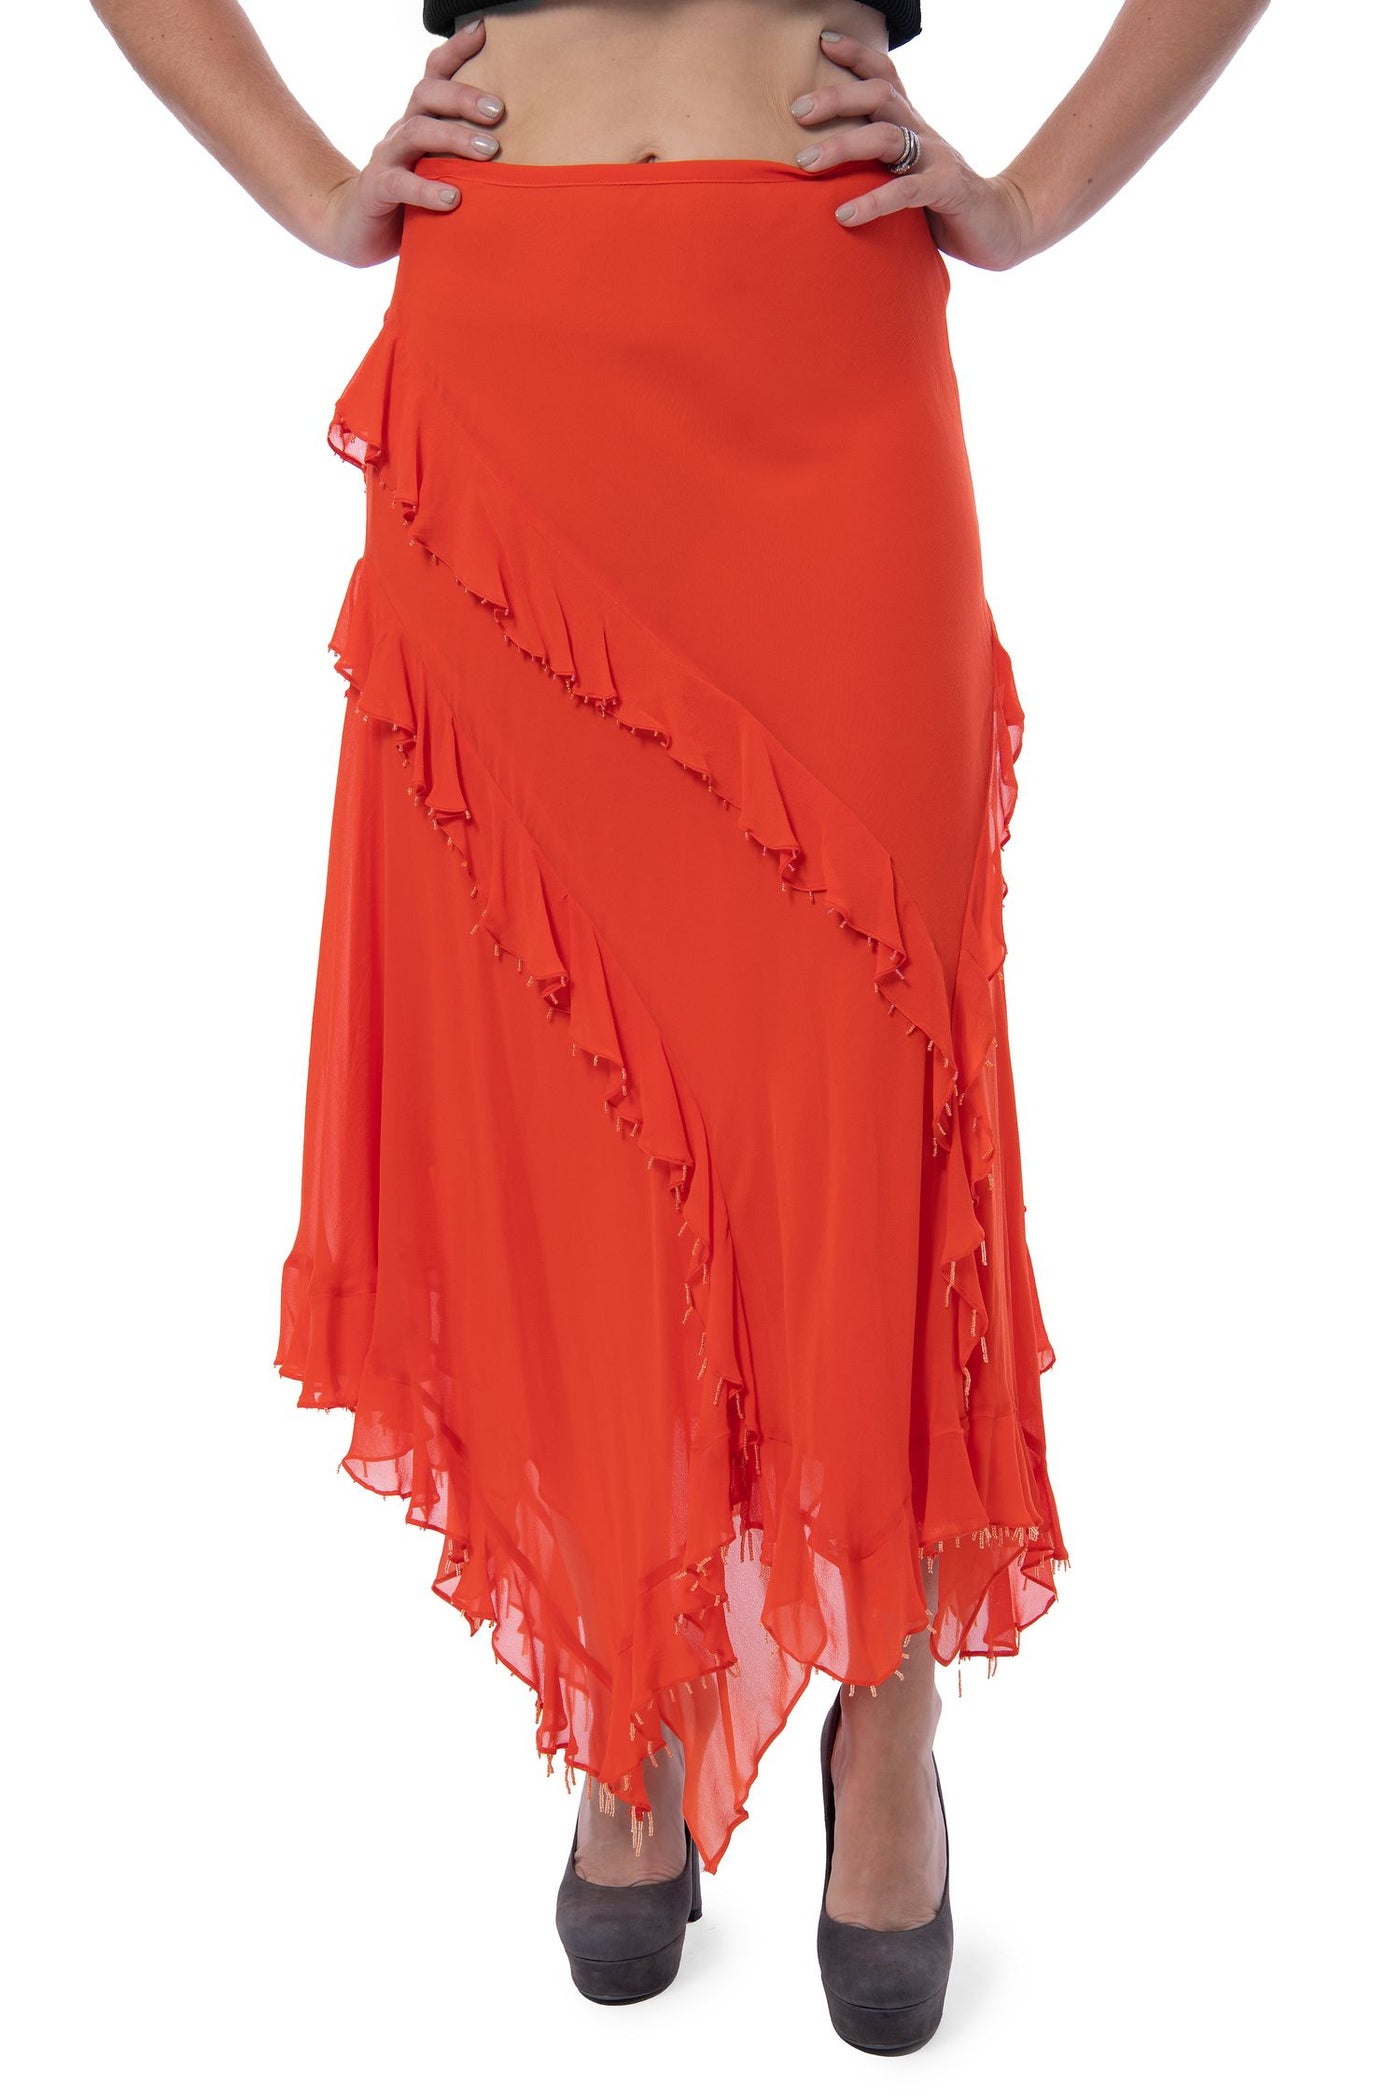 Orange maxi skirt with frill and beads